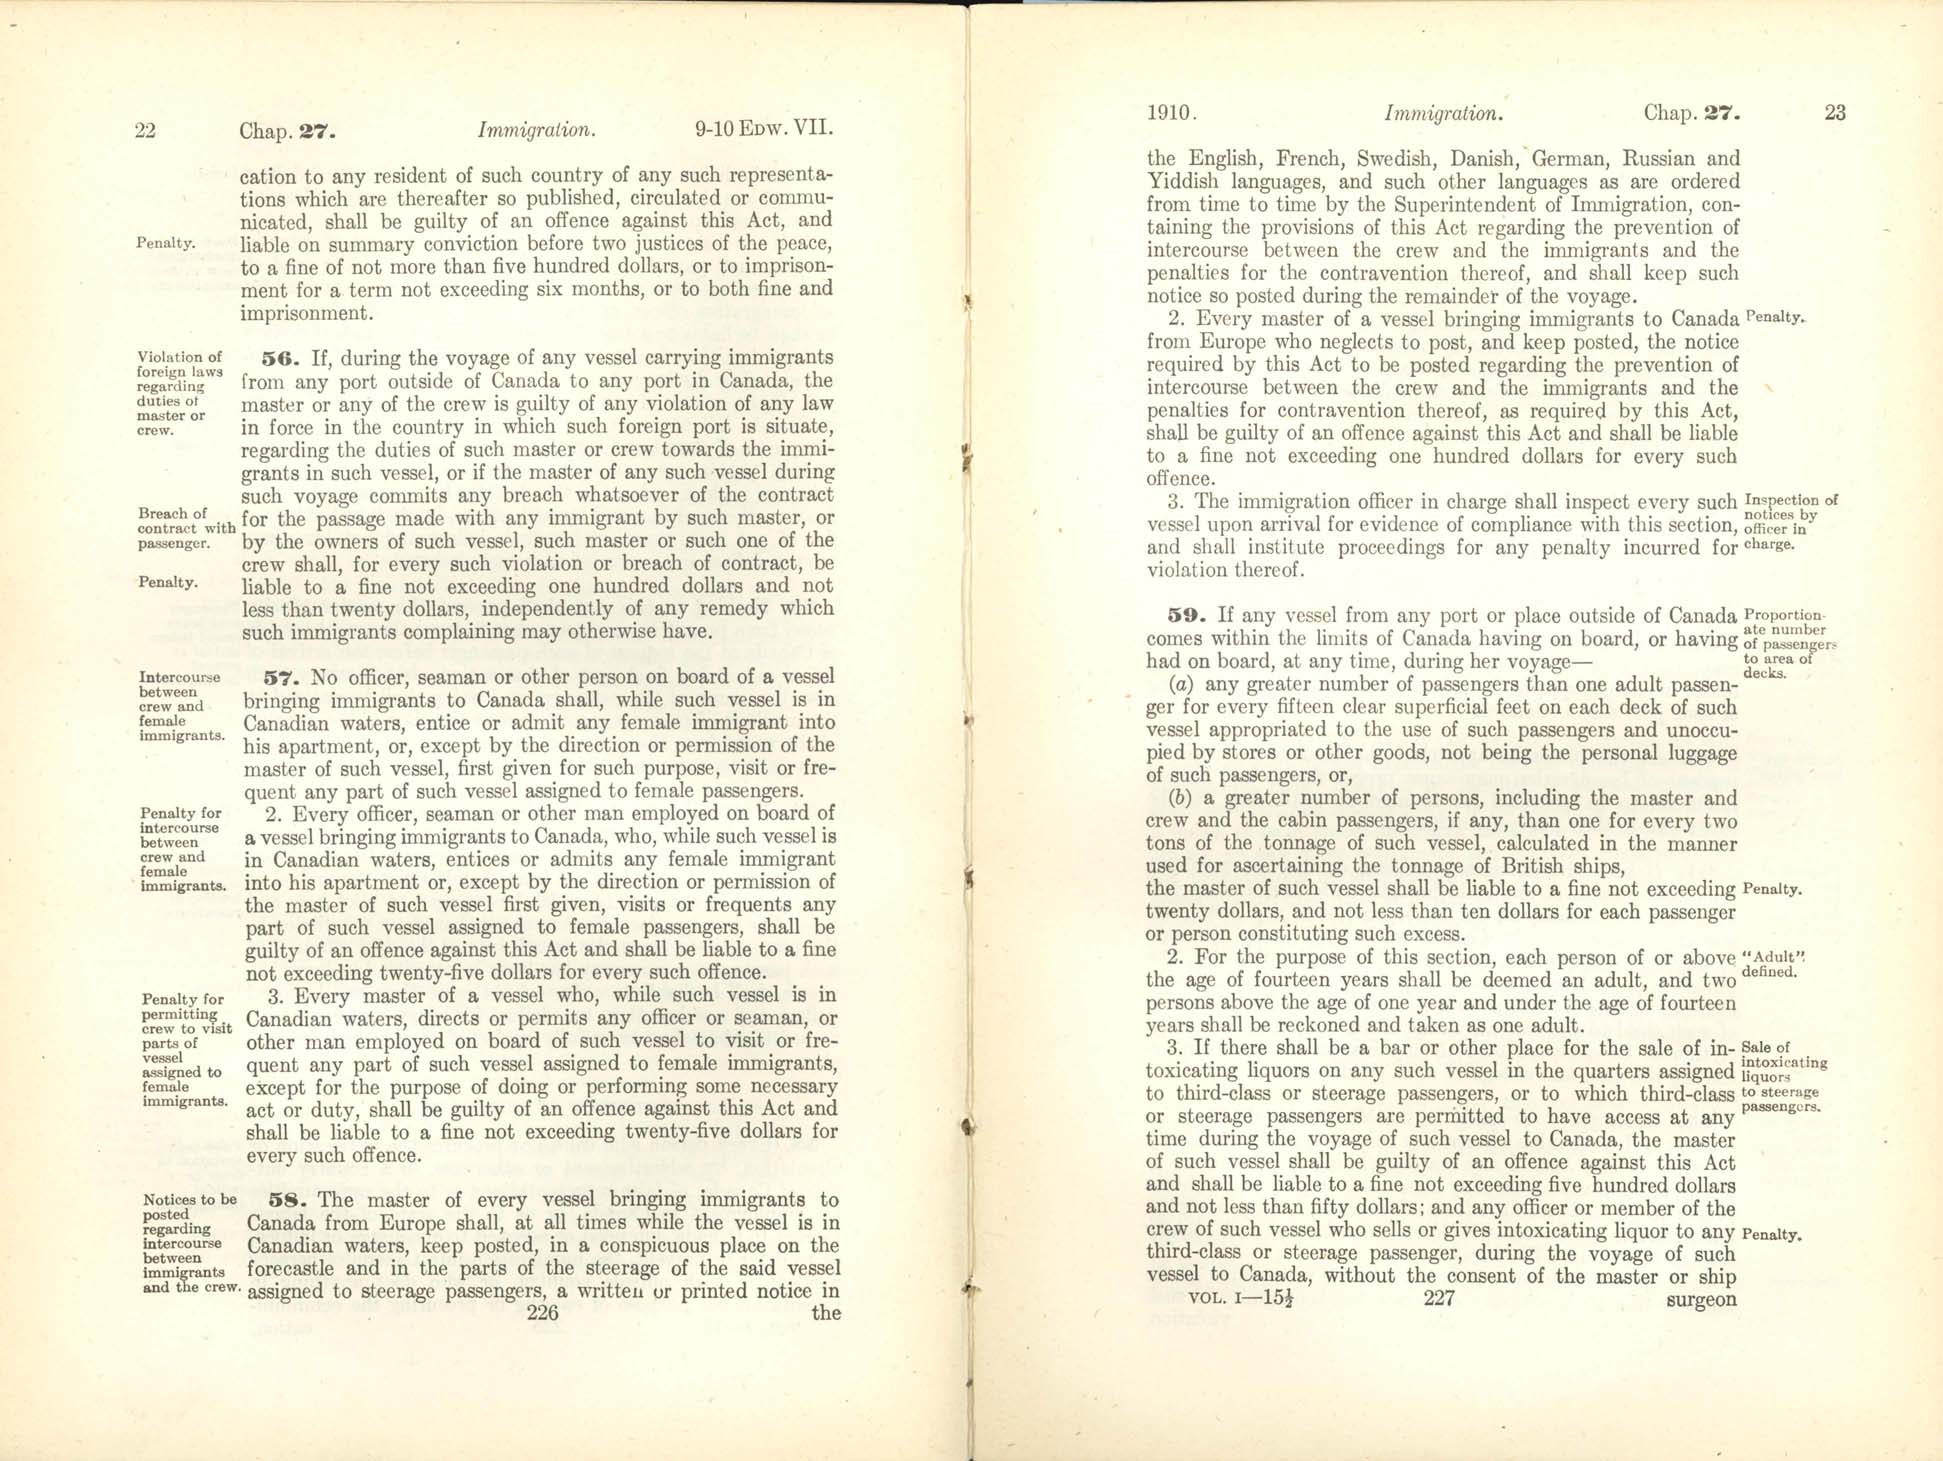 Chap. 27 Page 226, 227 Immigration Act, 1910